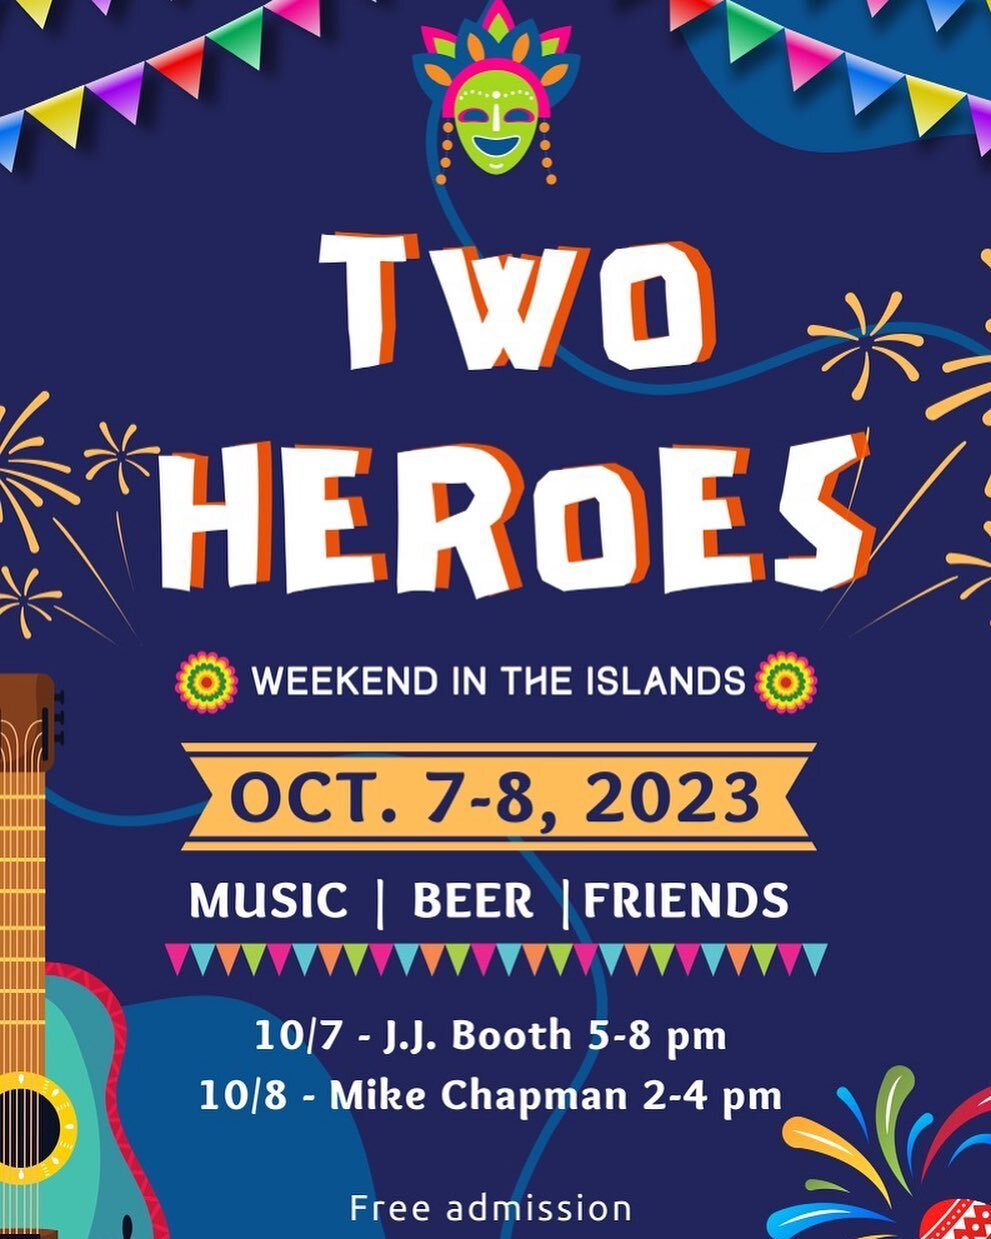 Come on out next weekend for brews, eats, and fun times !